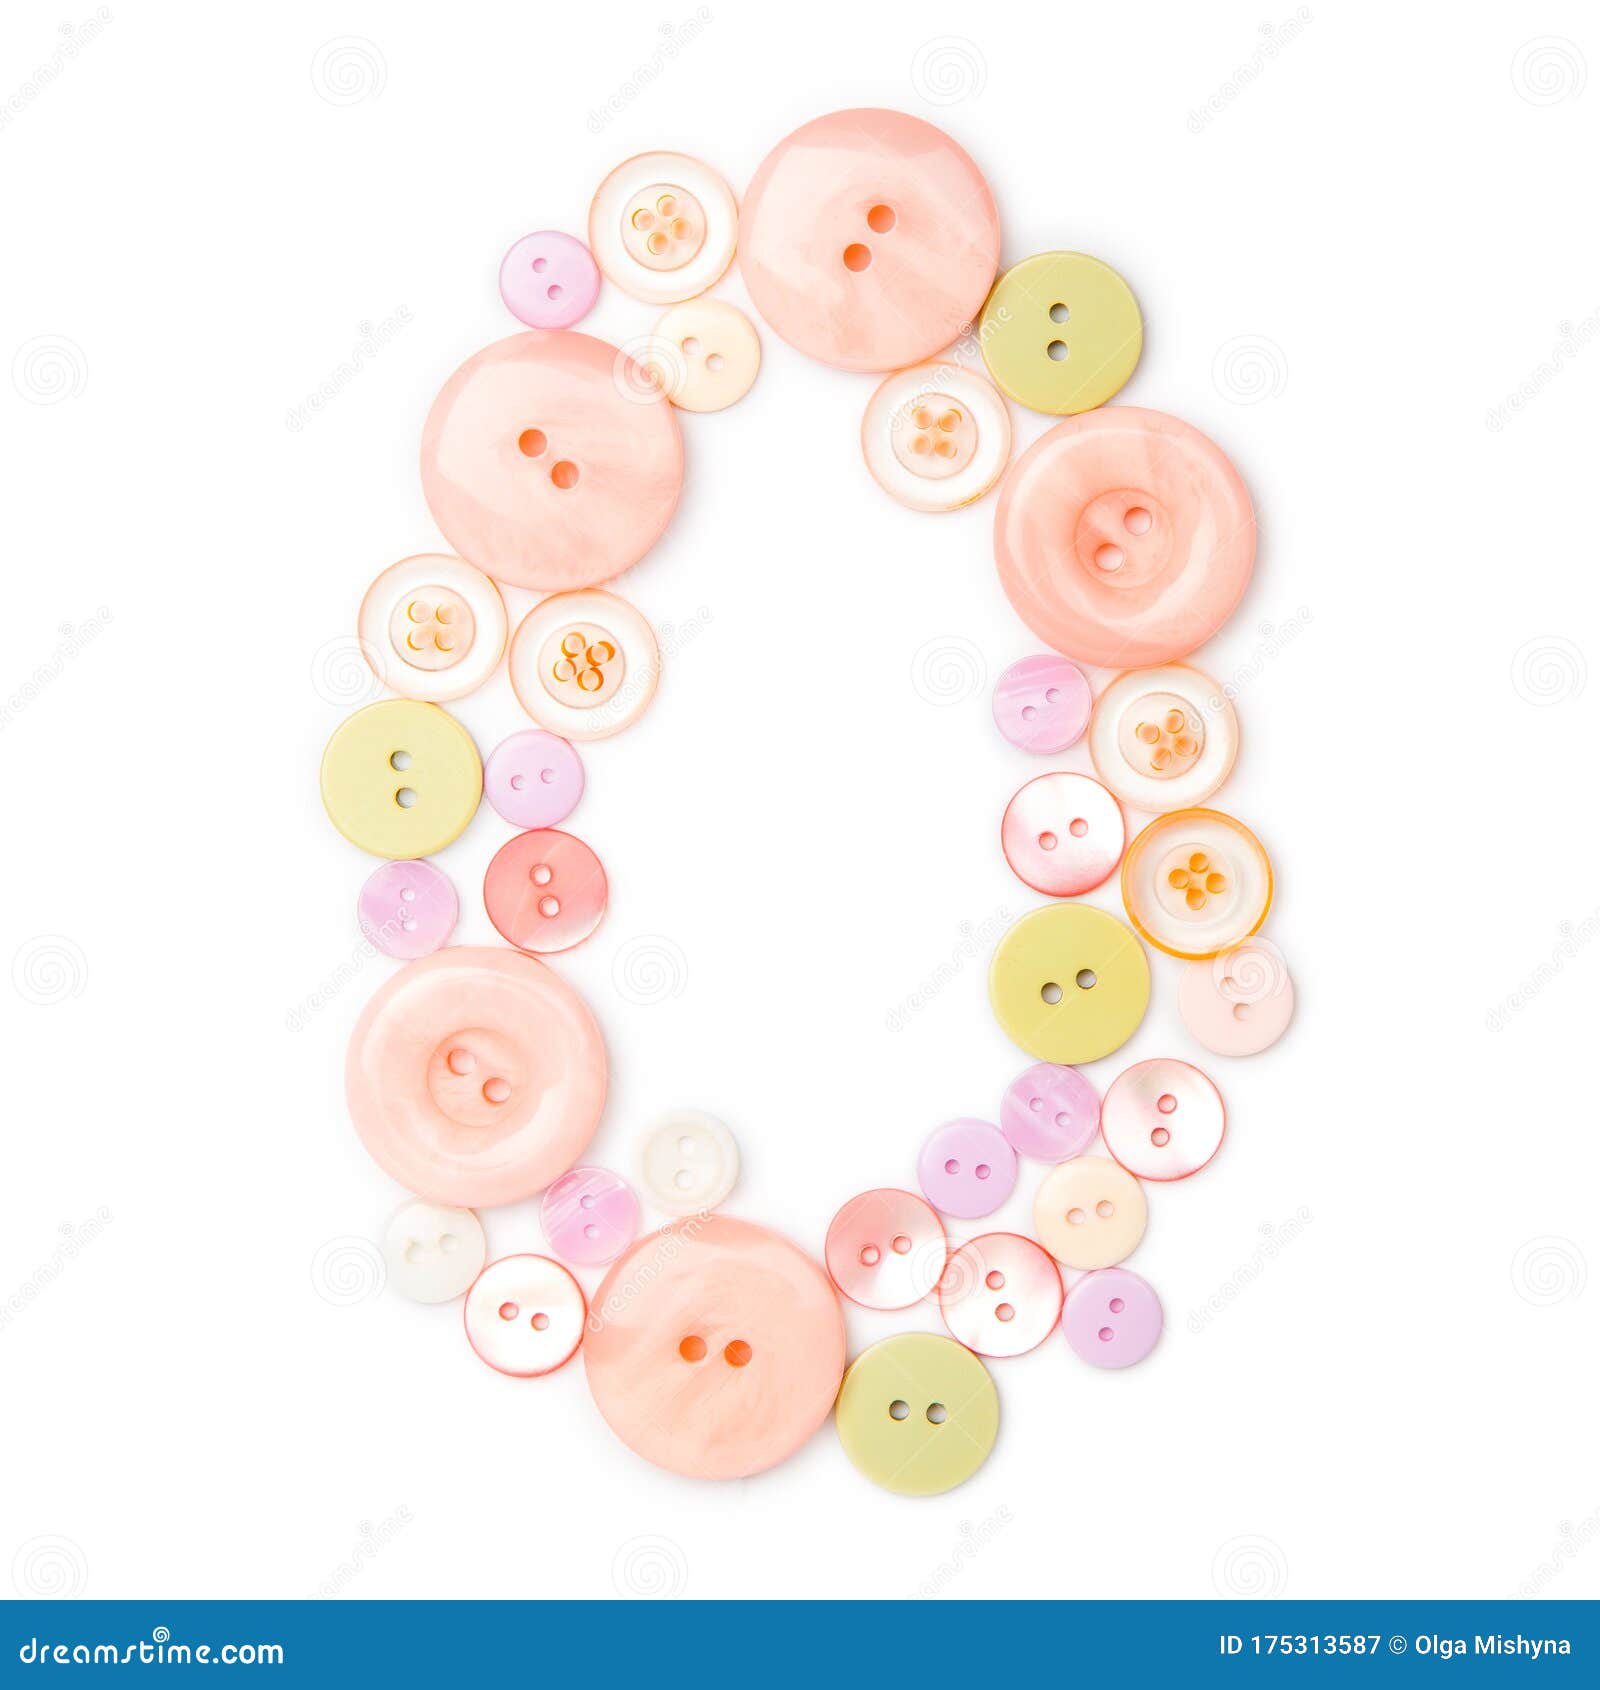 number-zero-pink-green-buttons-isolated-white-sewing-kit-colorful-button-one-stylish-alphabet-handmaking-hobby-175313587.jpg